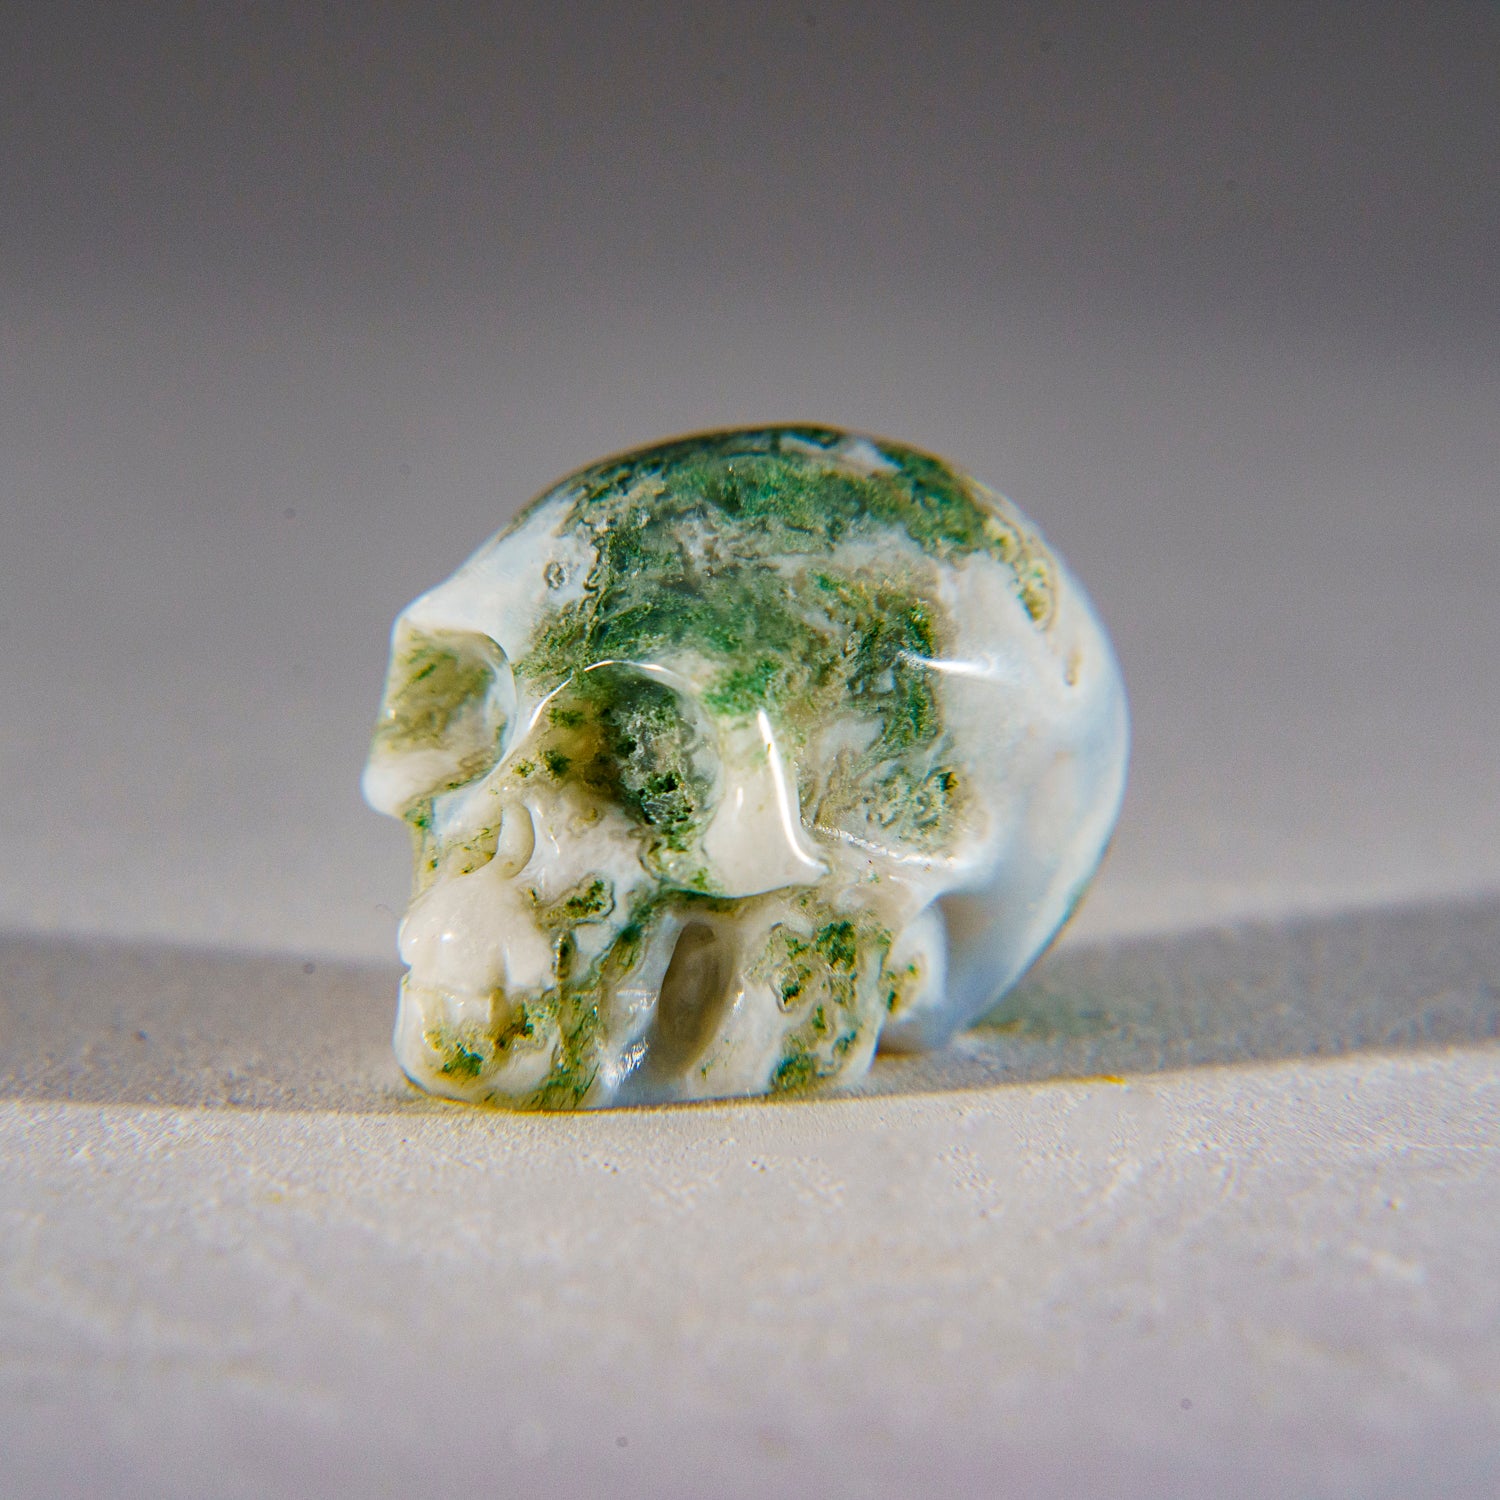 Polished Green Moss Agate Skull Carving (21 grams)